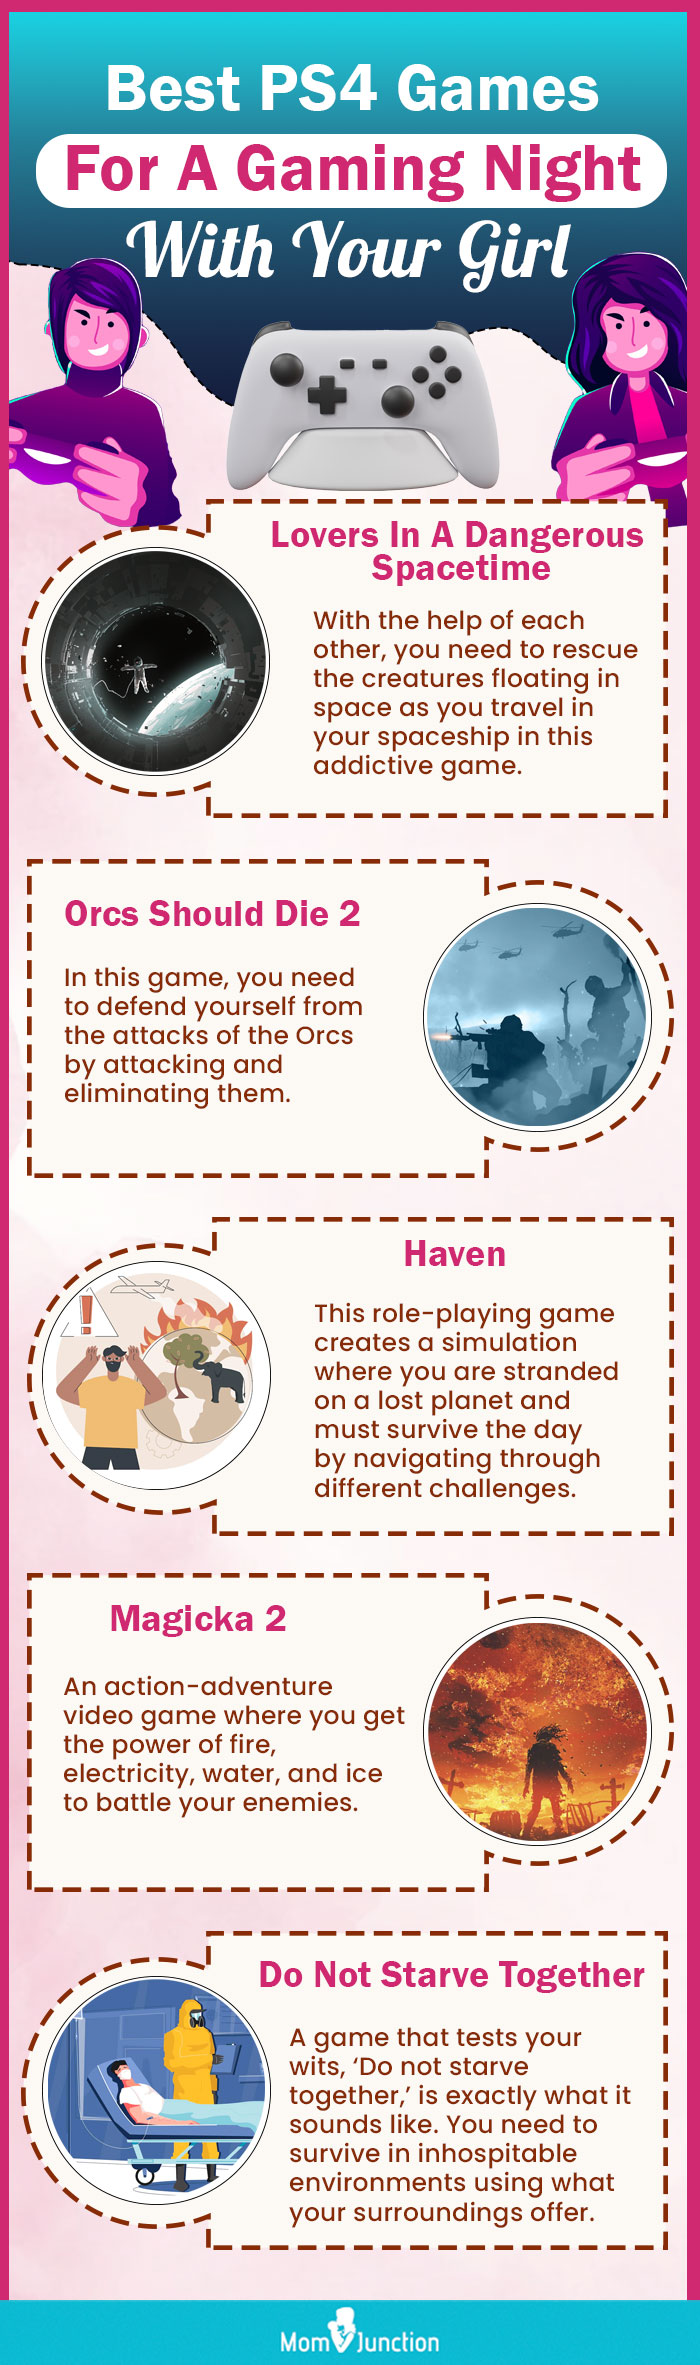 The guide to playing video games with your girlfriend